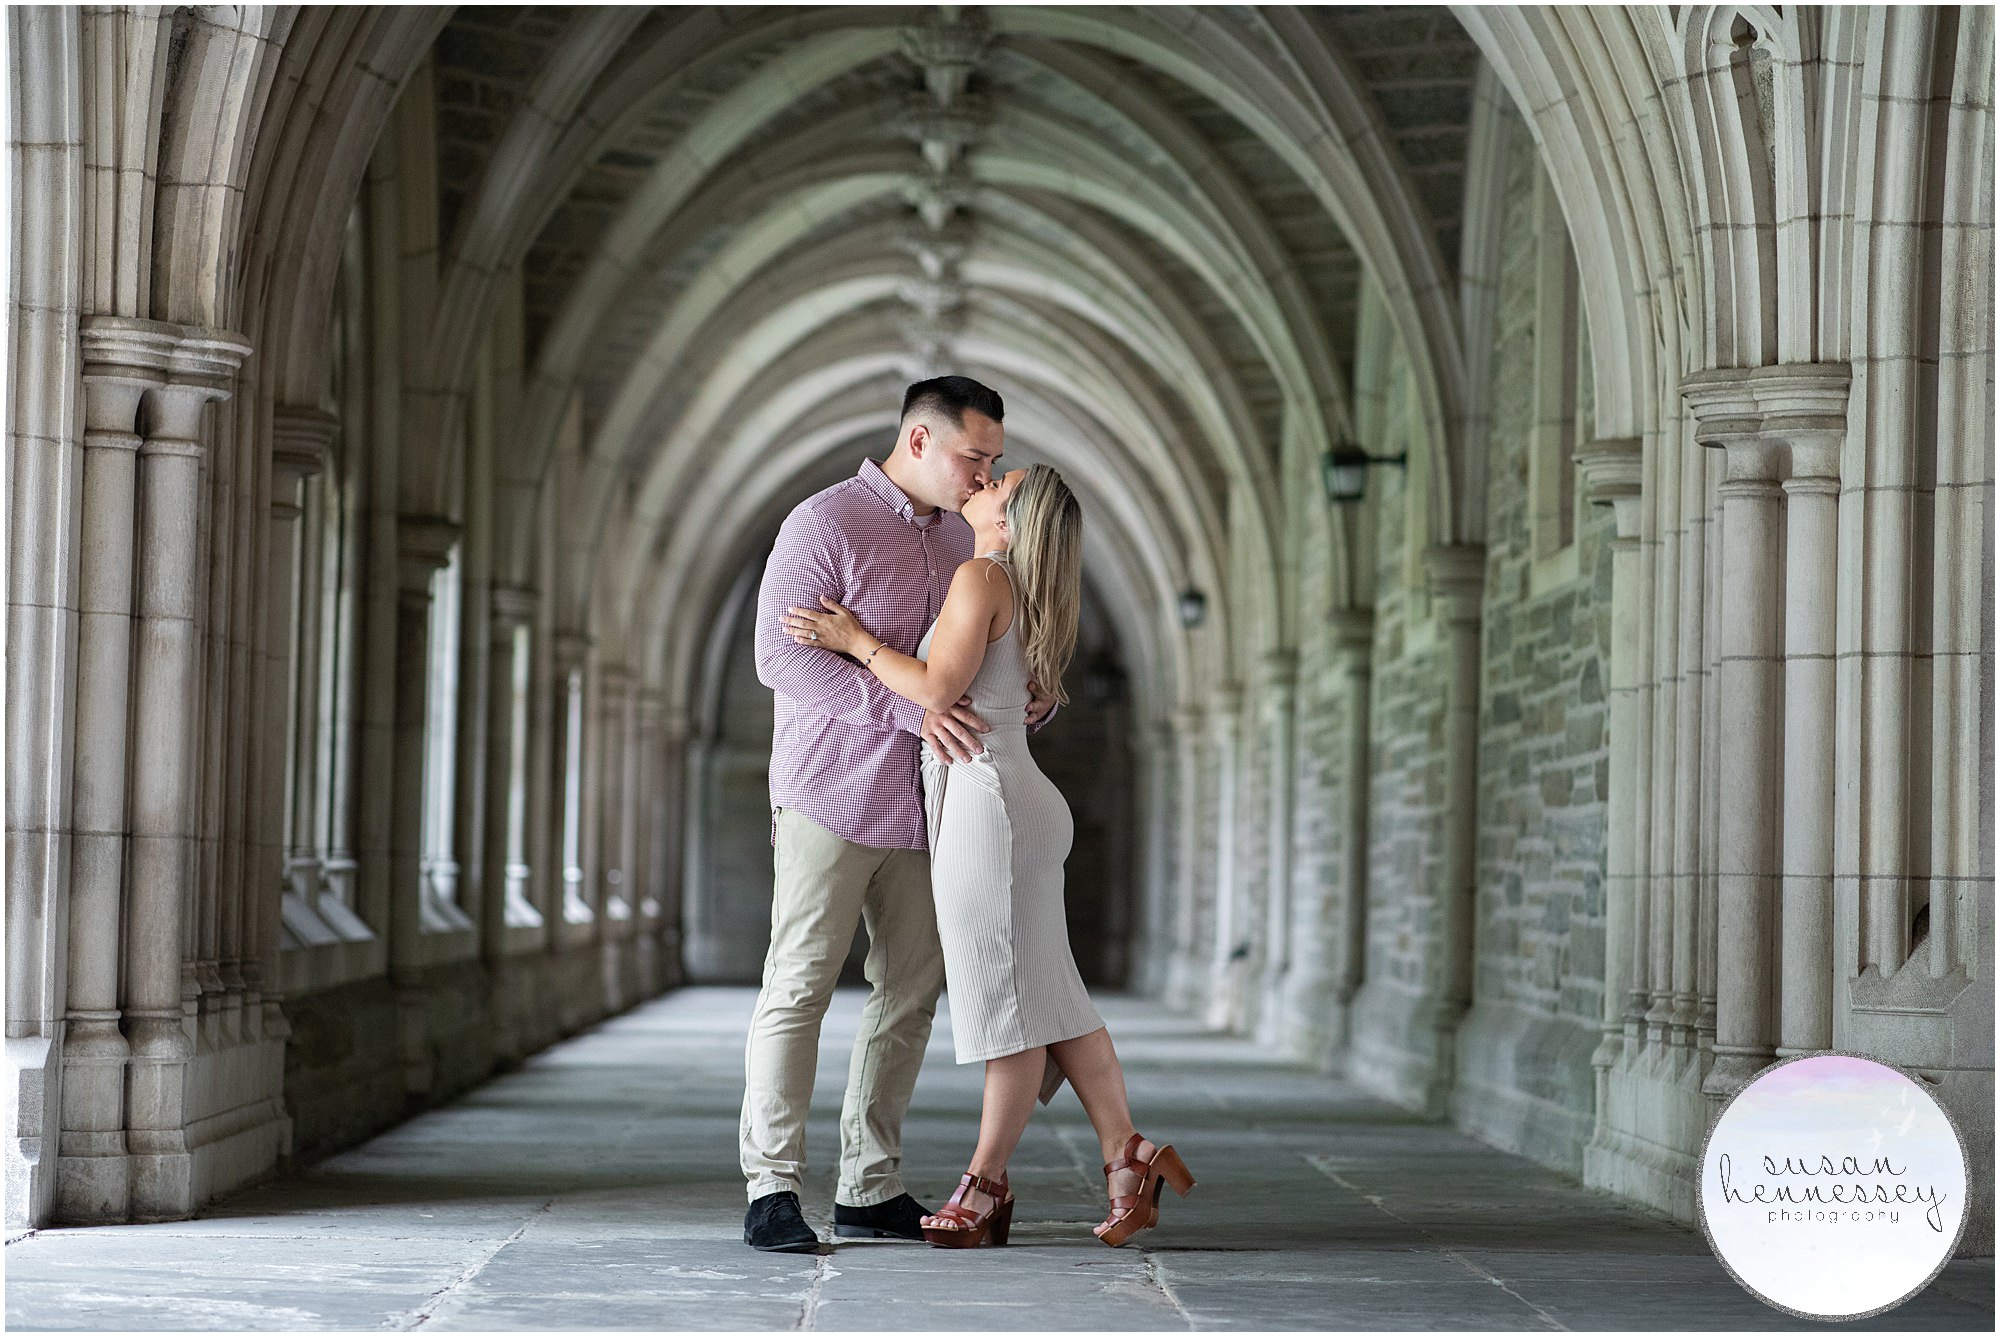 Engaged high school sweethearts at their Princeton Engagement Session 